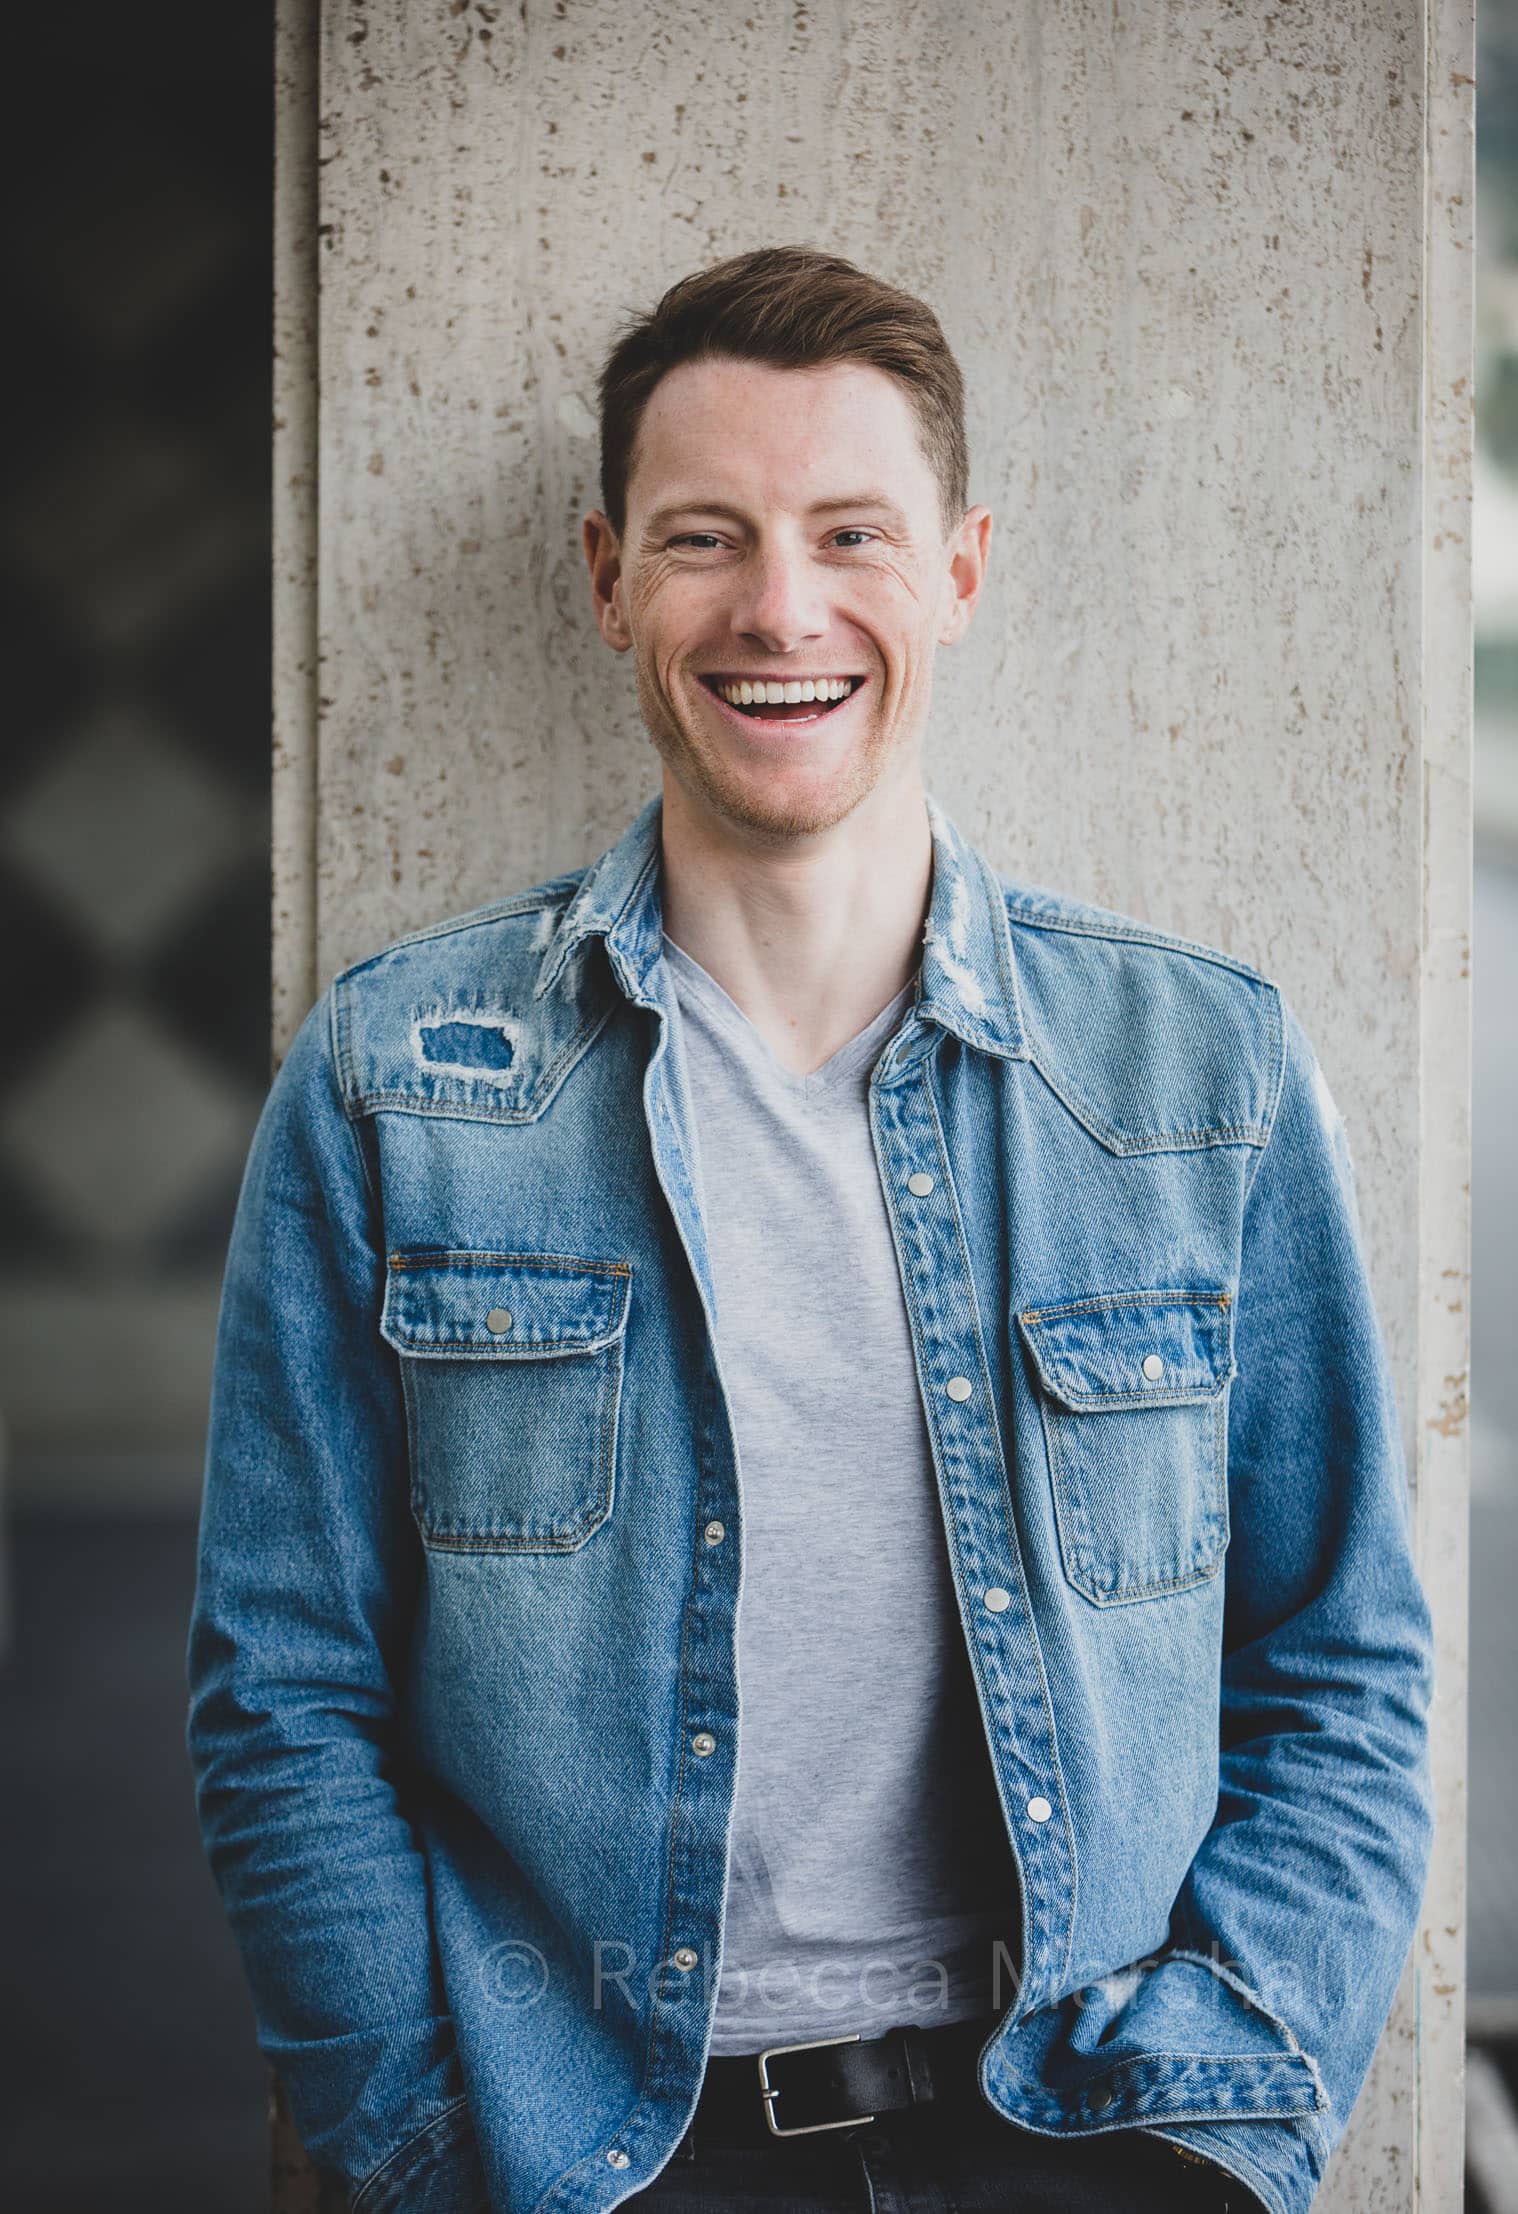 Photograph of Sam Bennett wearing a blue denim jacket, leaning against a wall and laughing